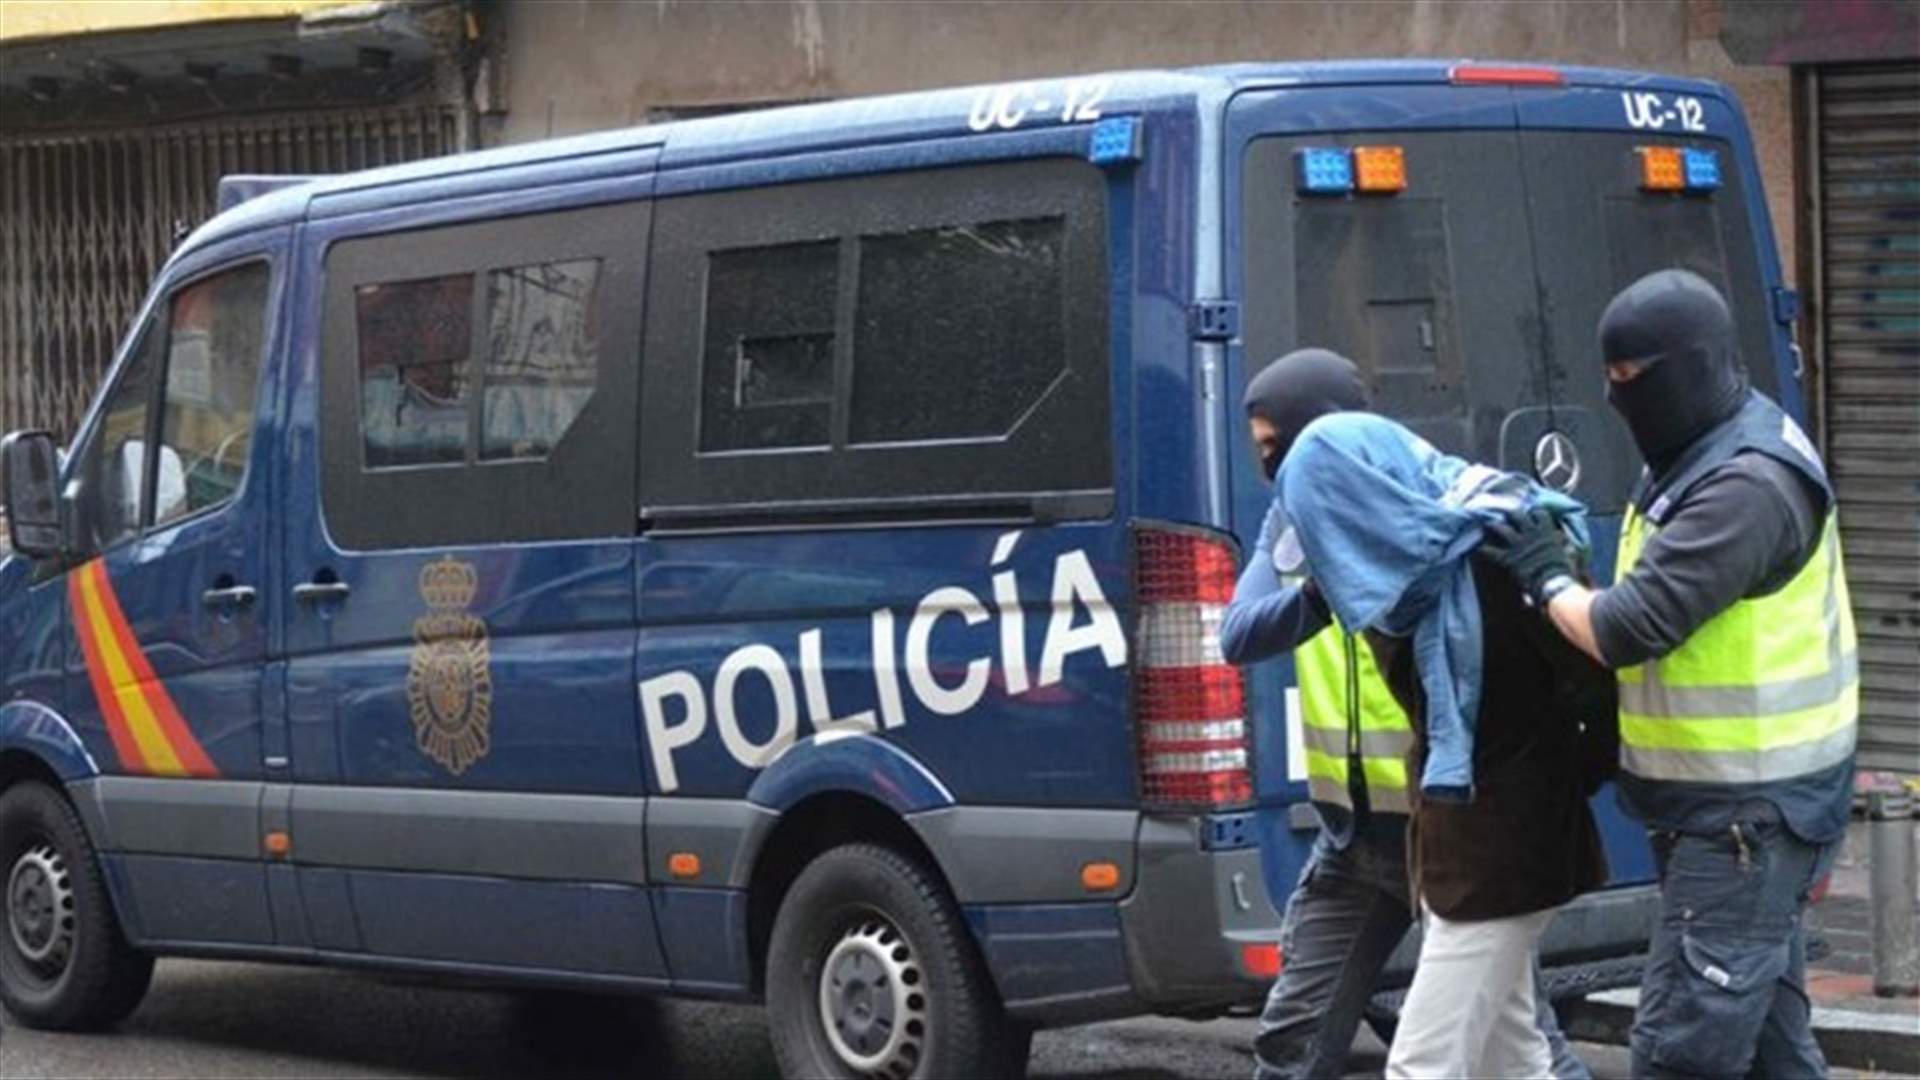 Spanish police arrest two Moroccans suspected of Islamist State links